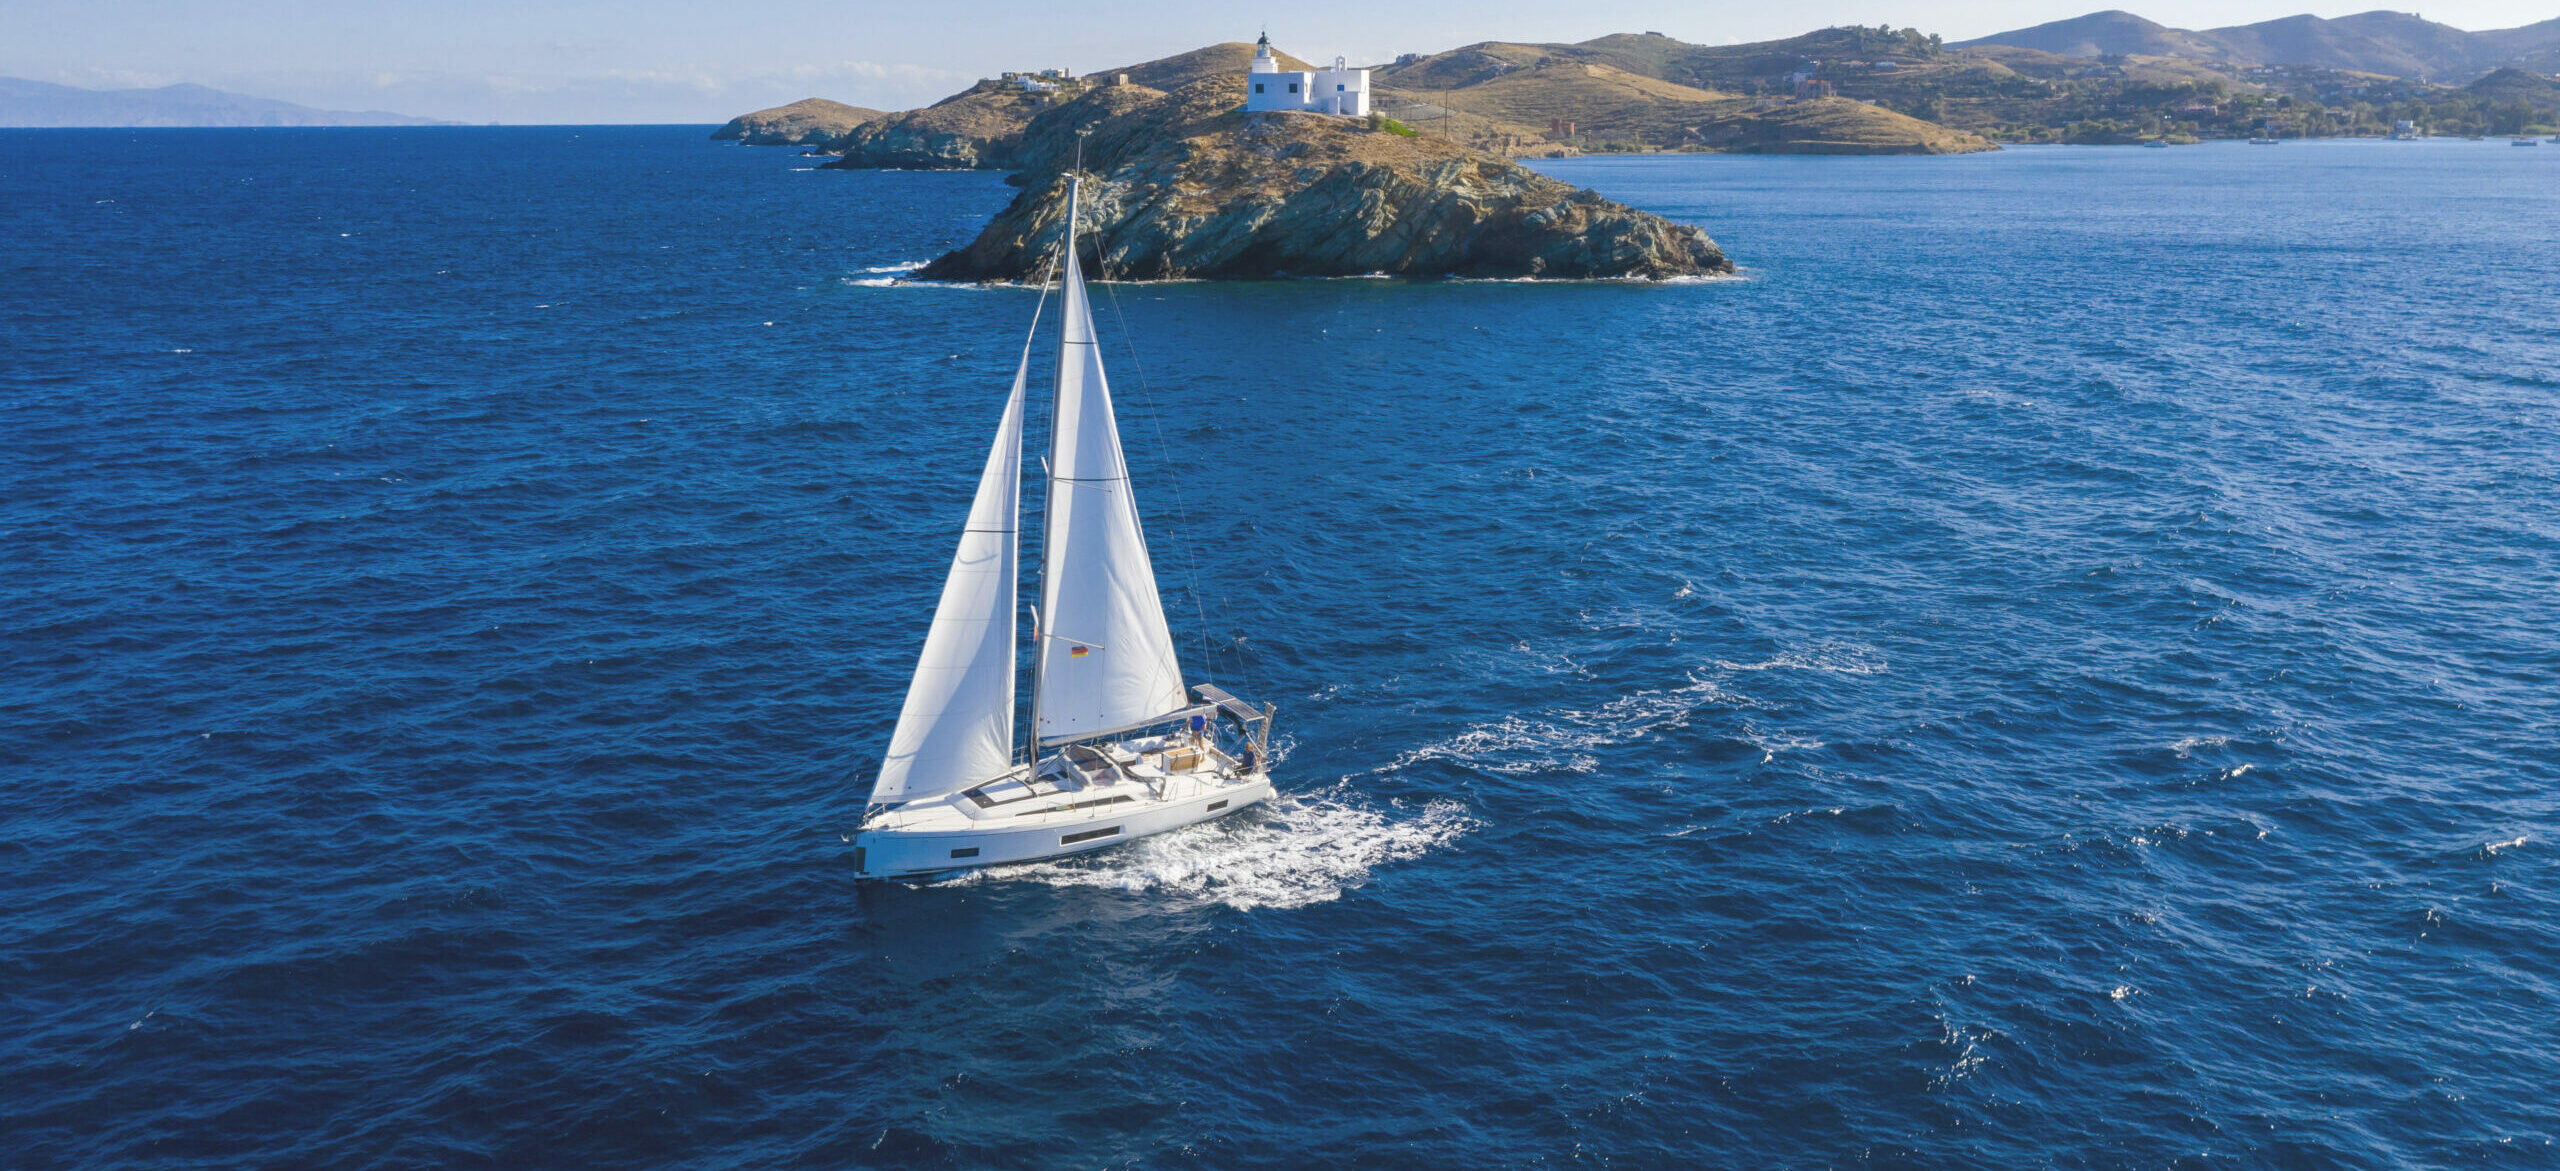 Three unforgettable days on a boat in the Aegean Sea